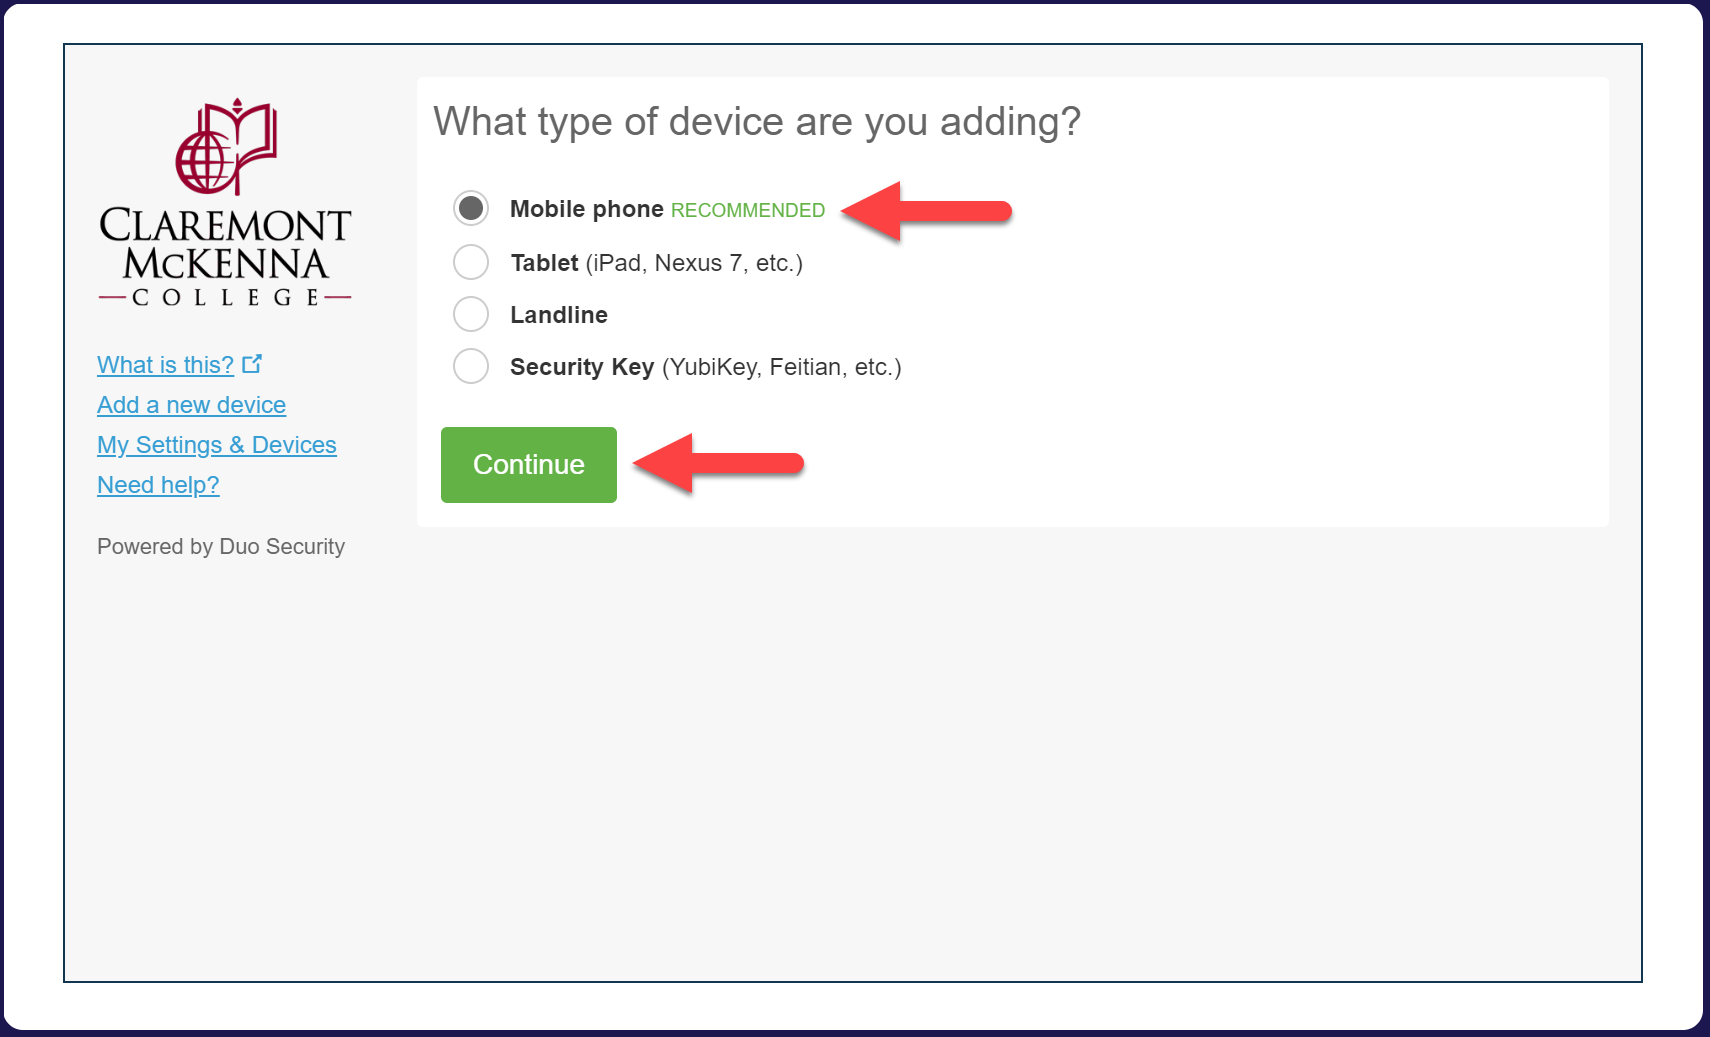 CMC Duo “What Type of Device are you adding?” Page with choices Mobile Phone, Tablet, Landline, Security Key, with arrow pointing to Mobile Phone and Continue